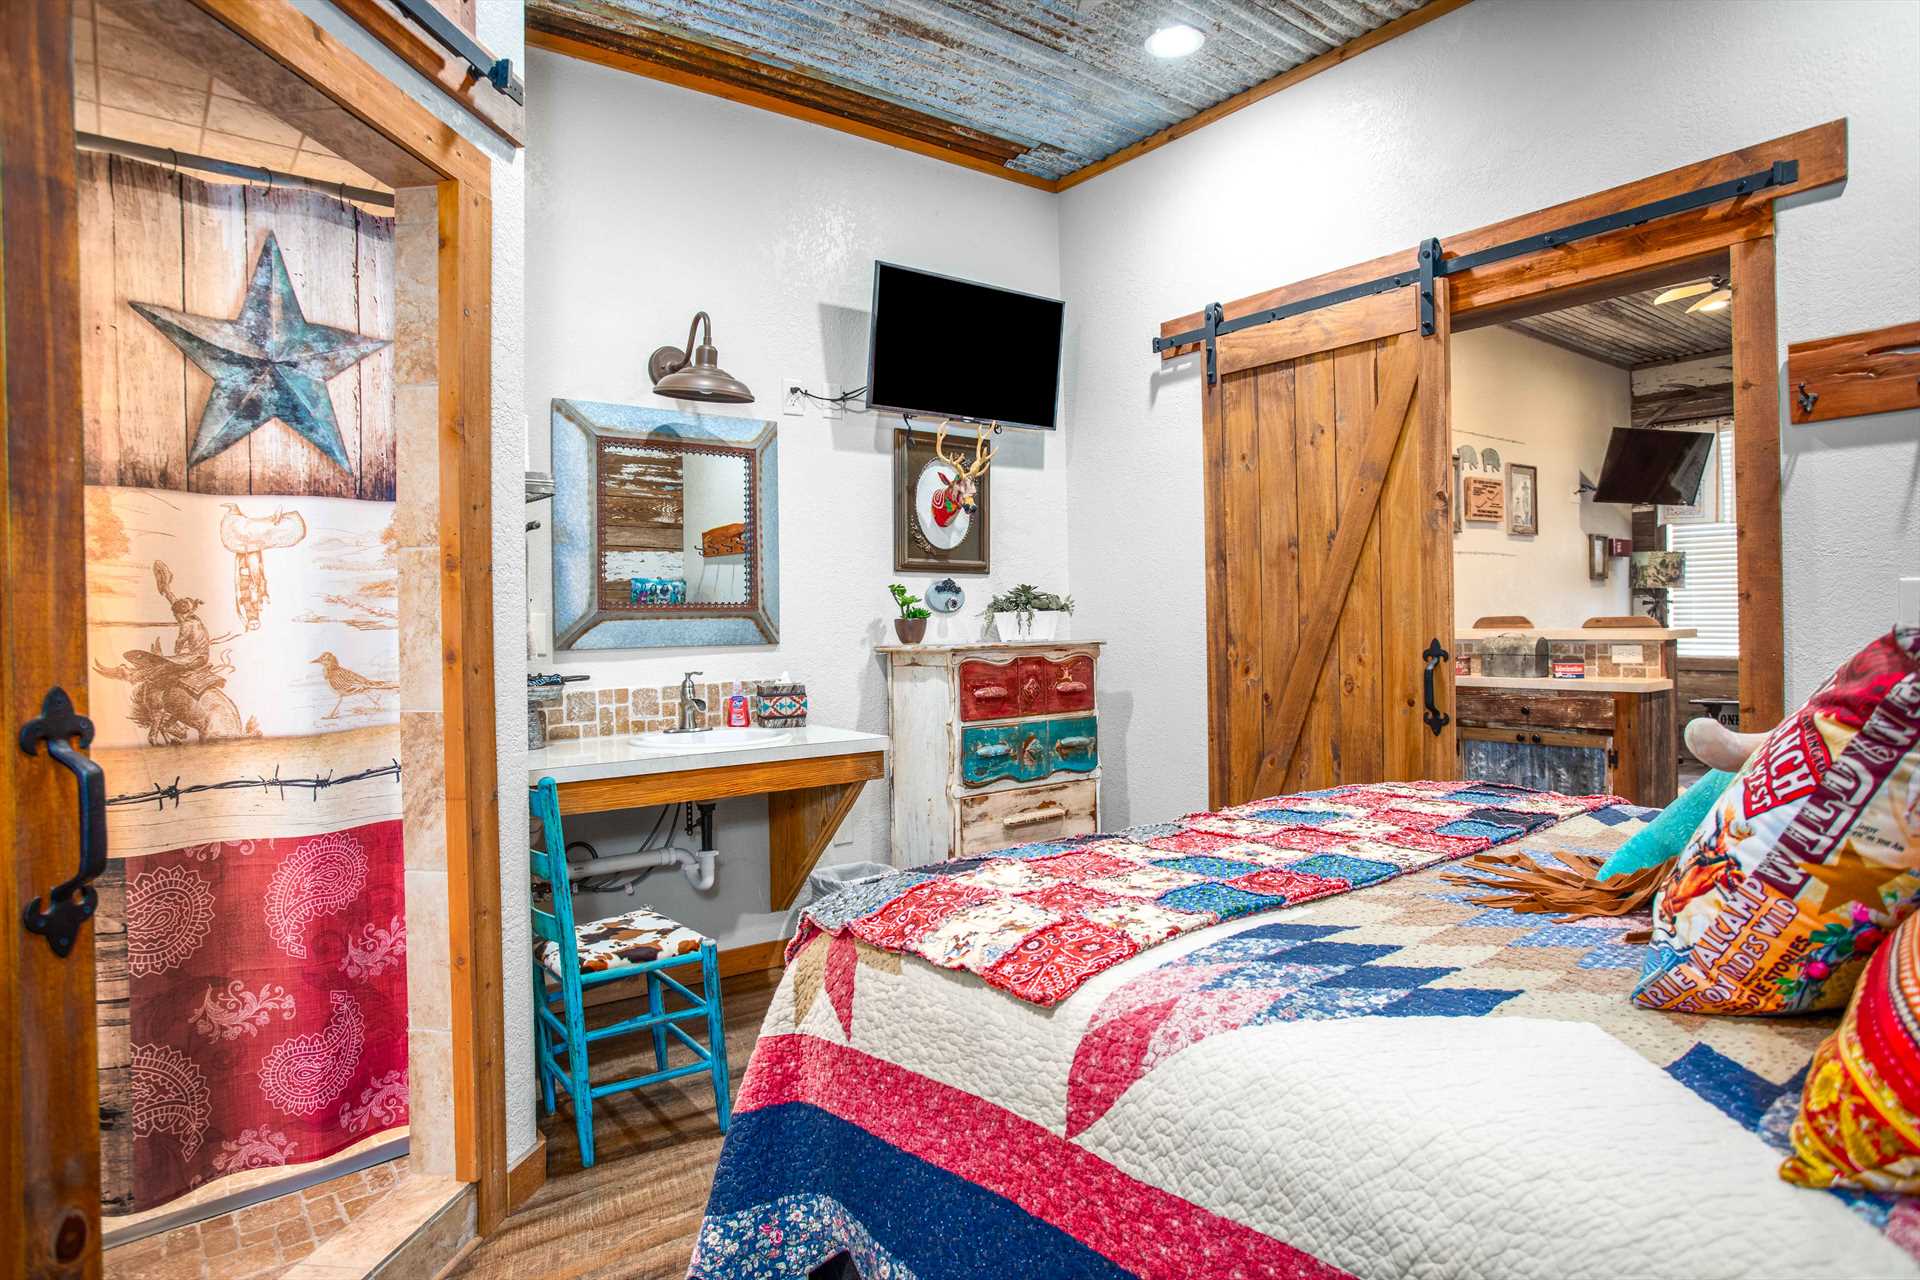                                                 A plush queen-sized bed graces the bedroom at Lonesome Dove, with a fantastically western-style barnboard door for privacy.